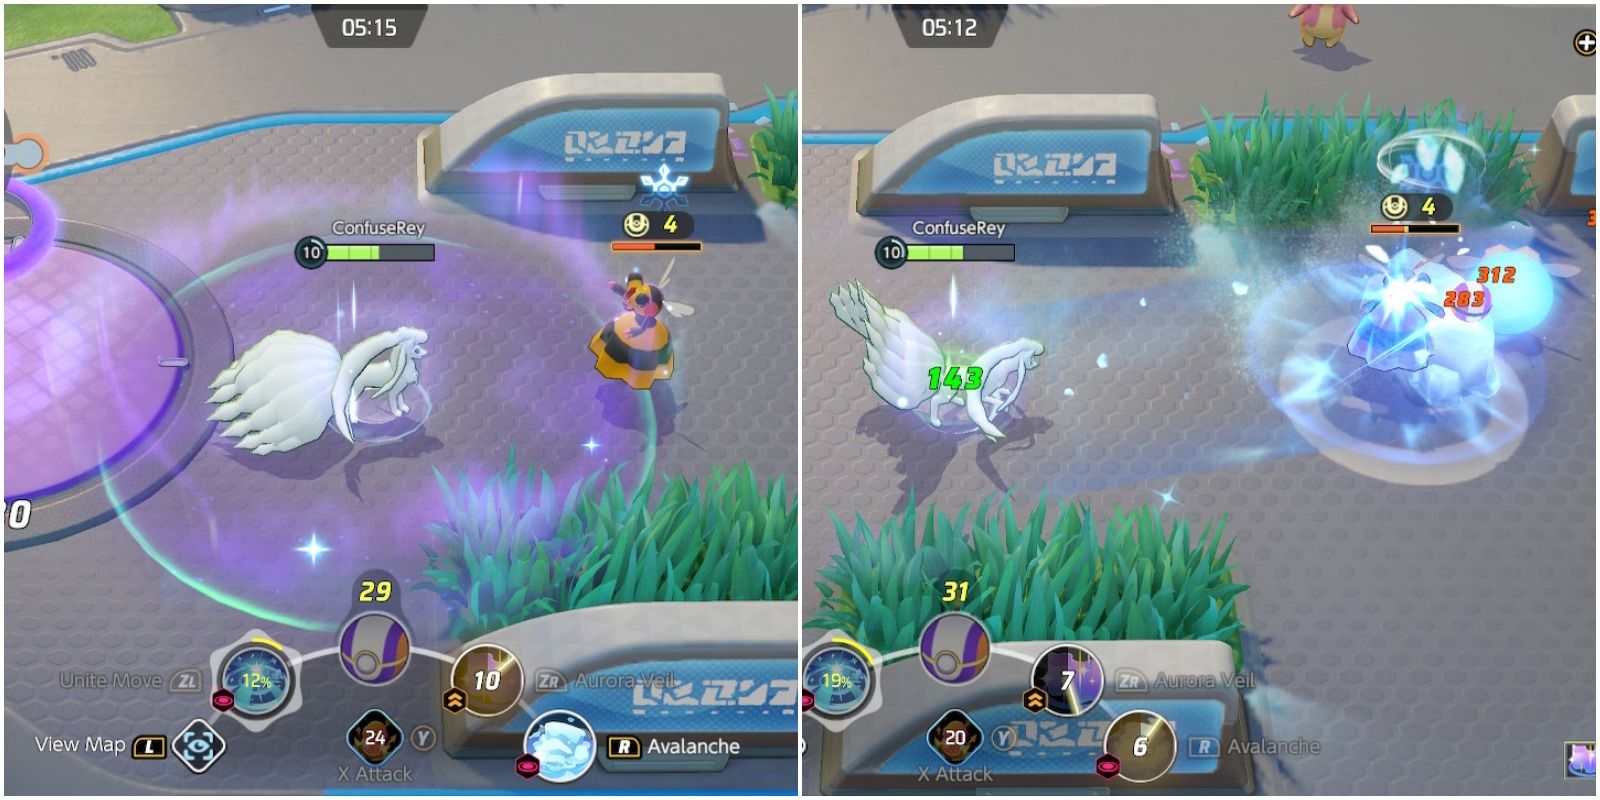 the ice and fairy pokemon using 2 of its attacks.